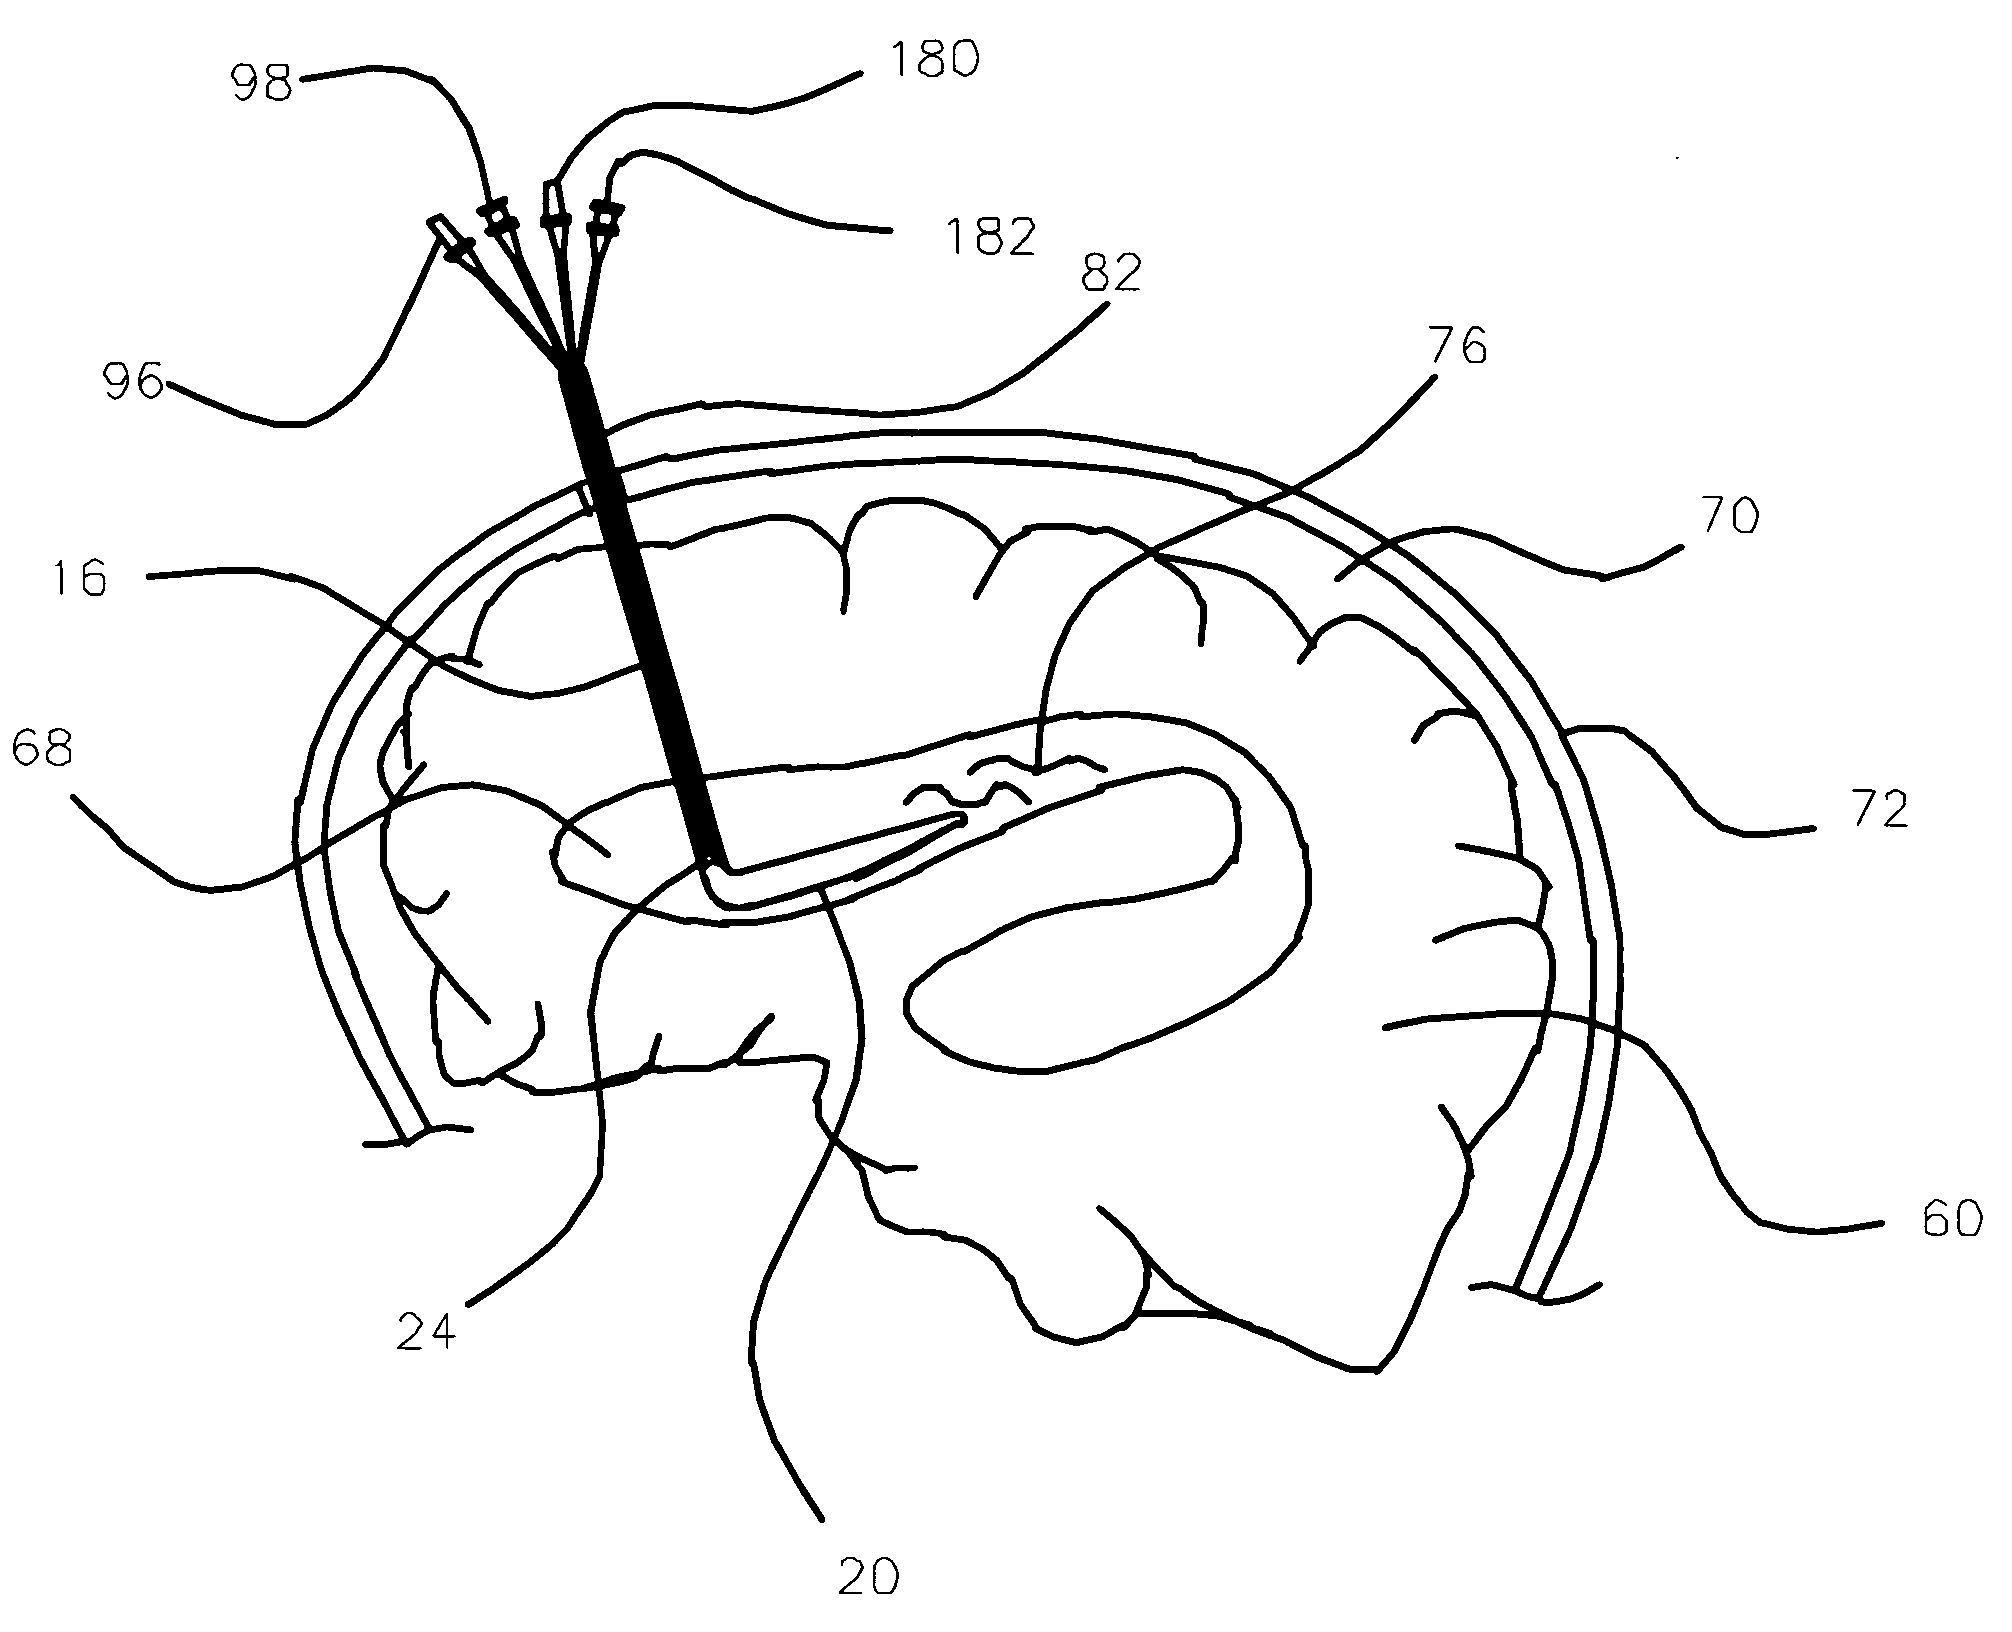 Medical device and method for temperature control and treatment of the brain and spinal cord